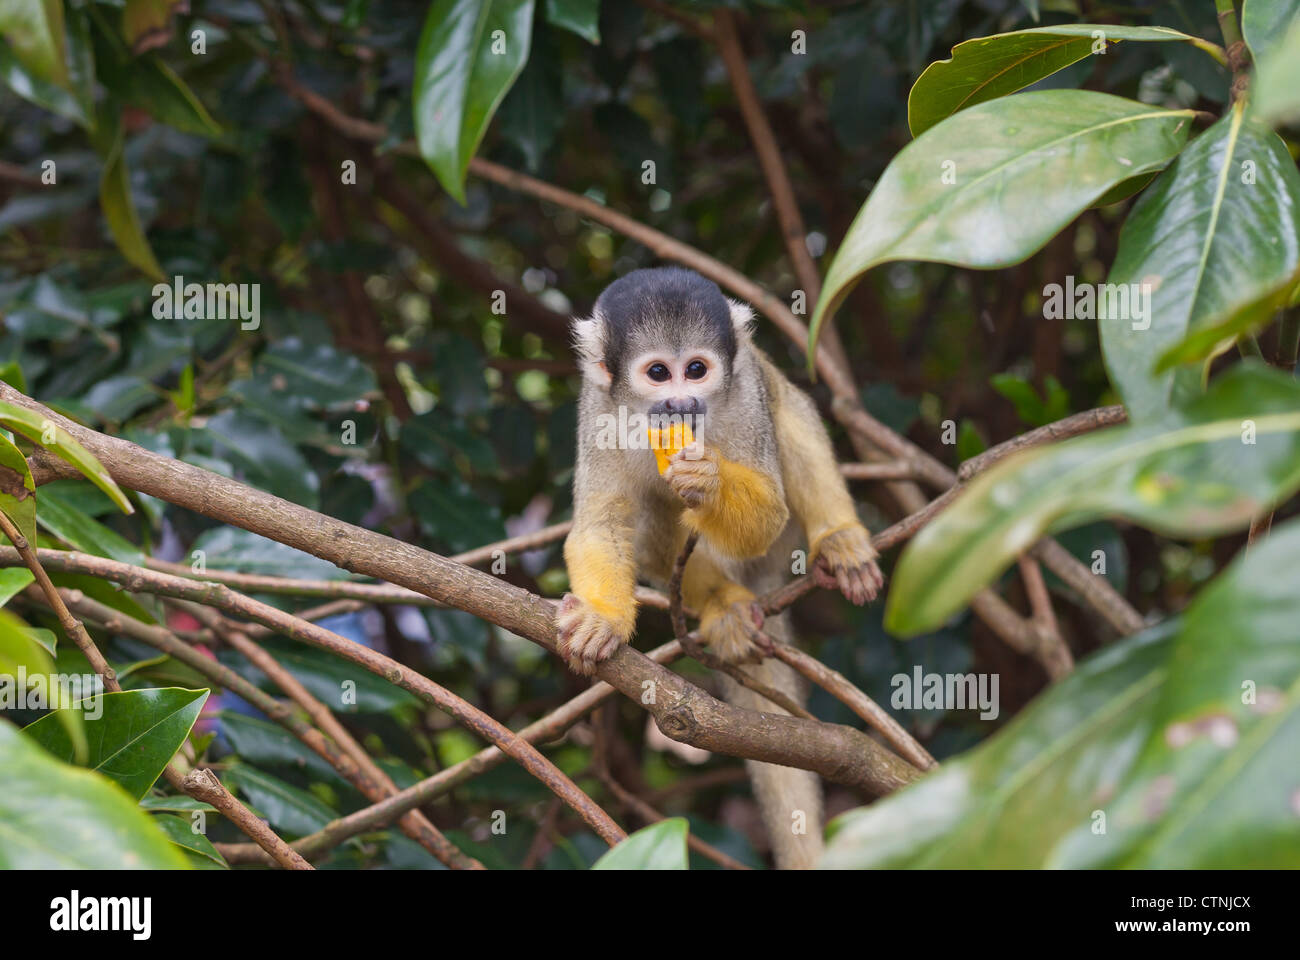 Black Capped Bolivian Squirrel Monkey at London Zoo Stock Photo